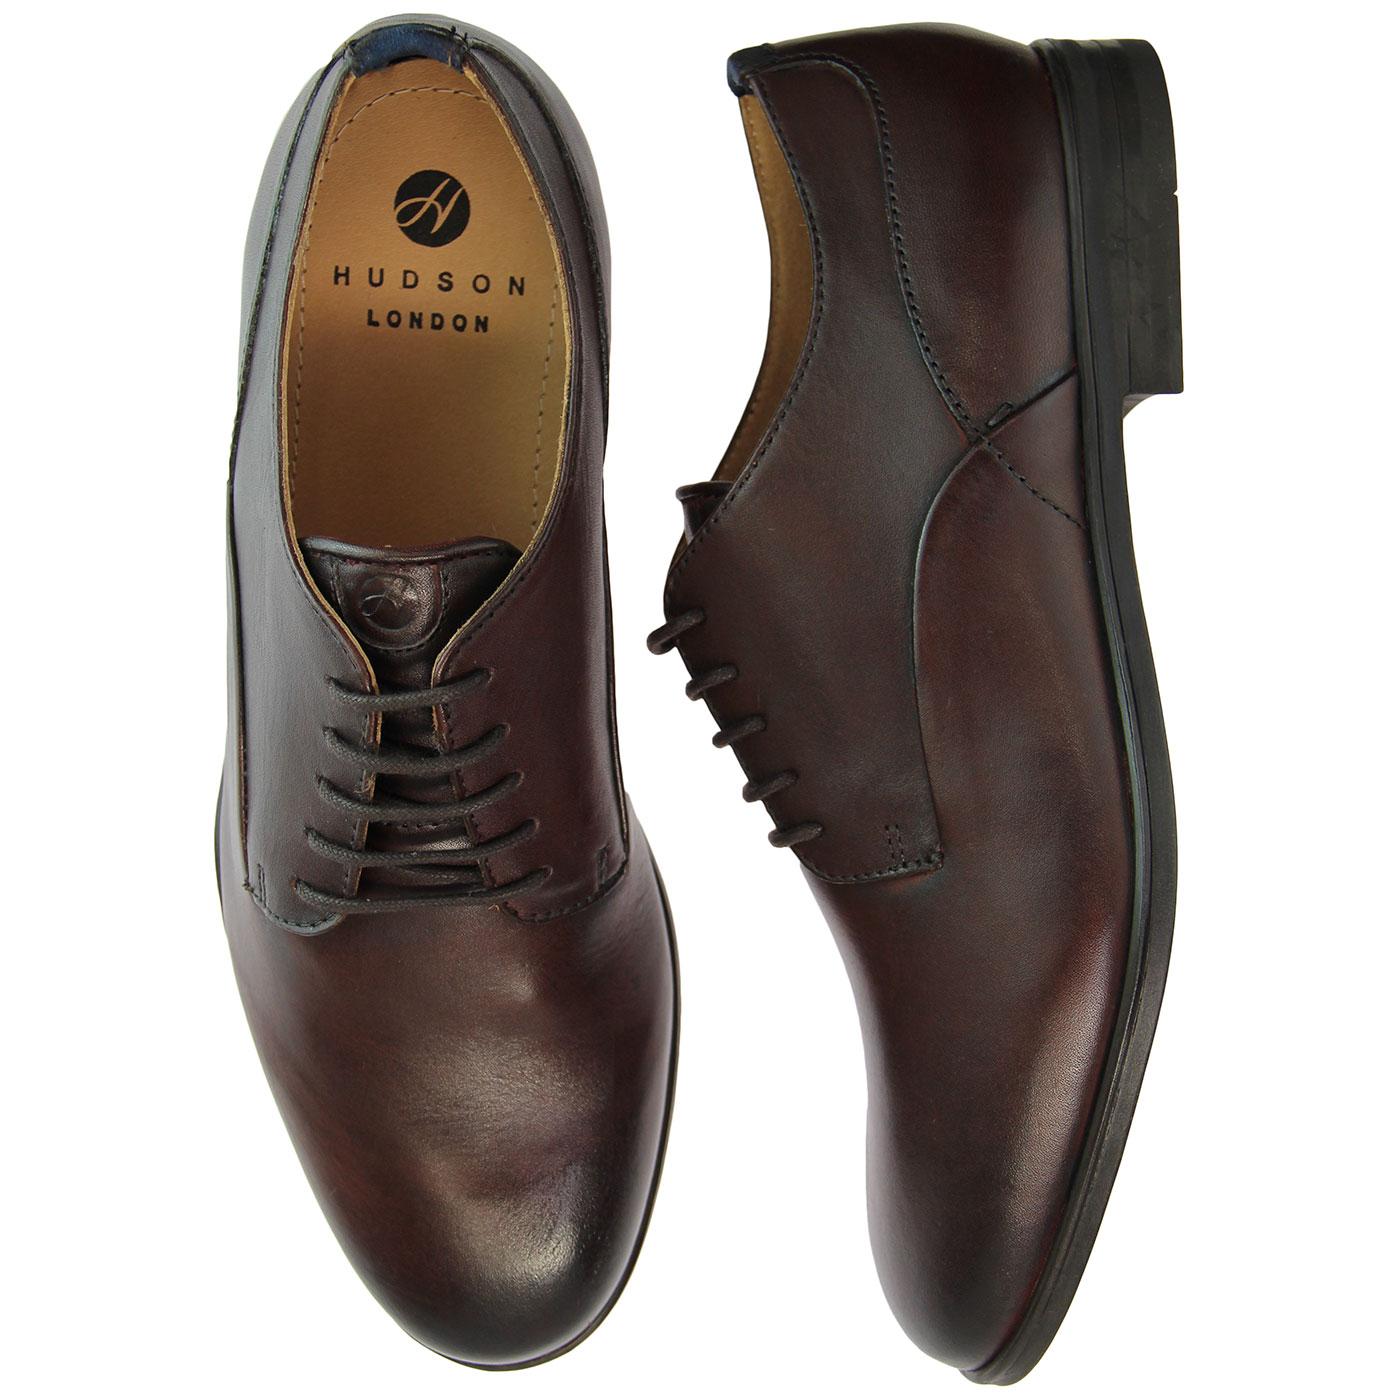 HUDSON Axminster 1960s Mod Leather Derby Shoes in Brown